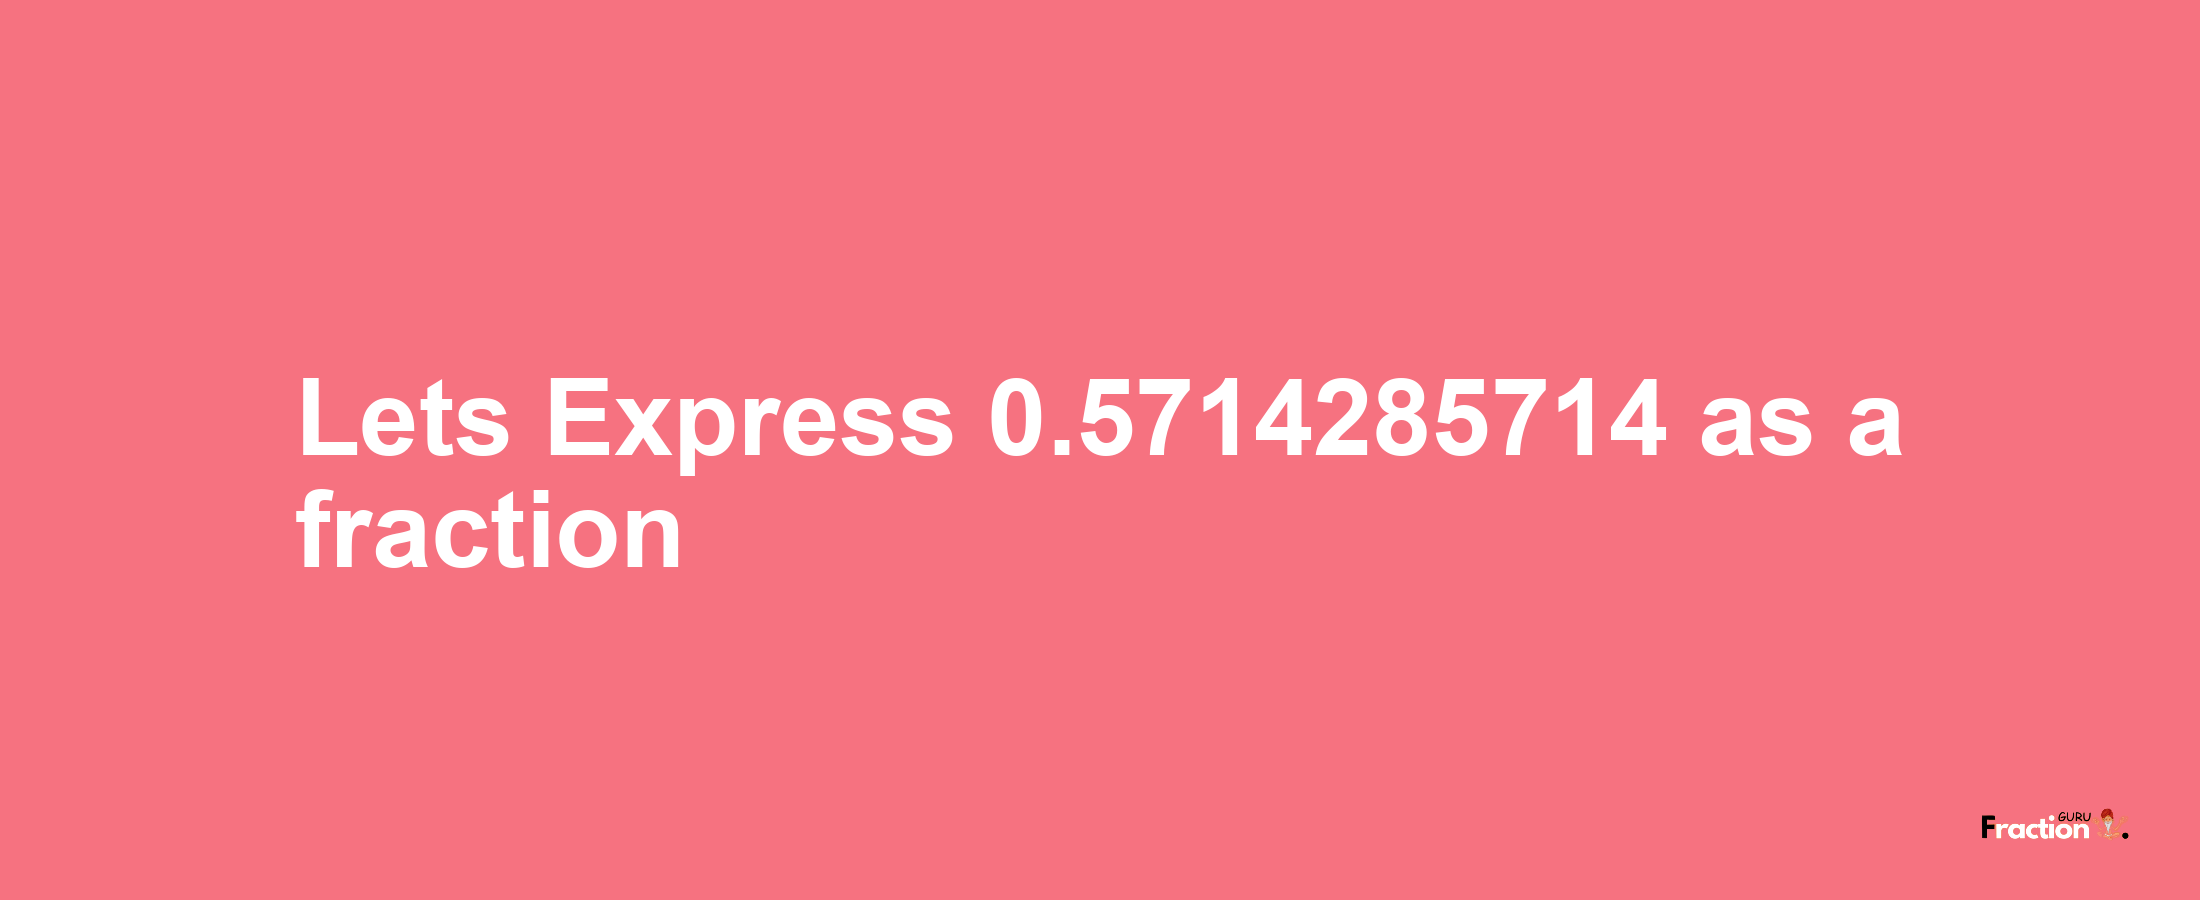 Lets Express 0.5714285714 as afraction